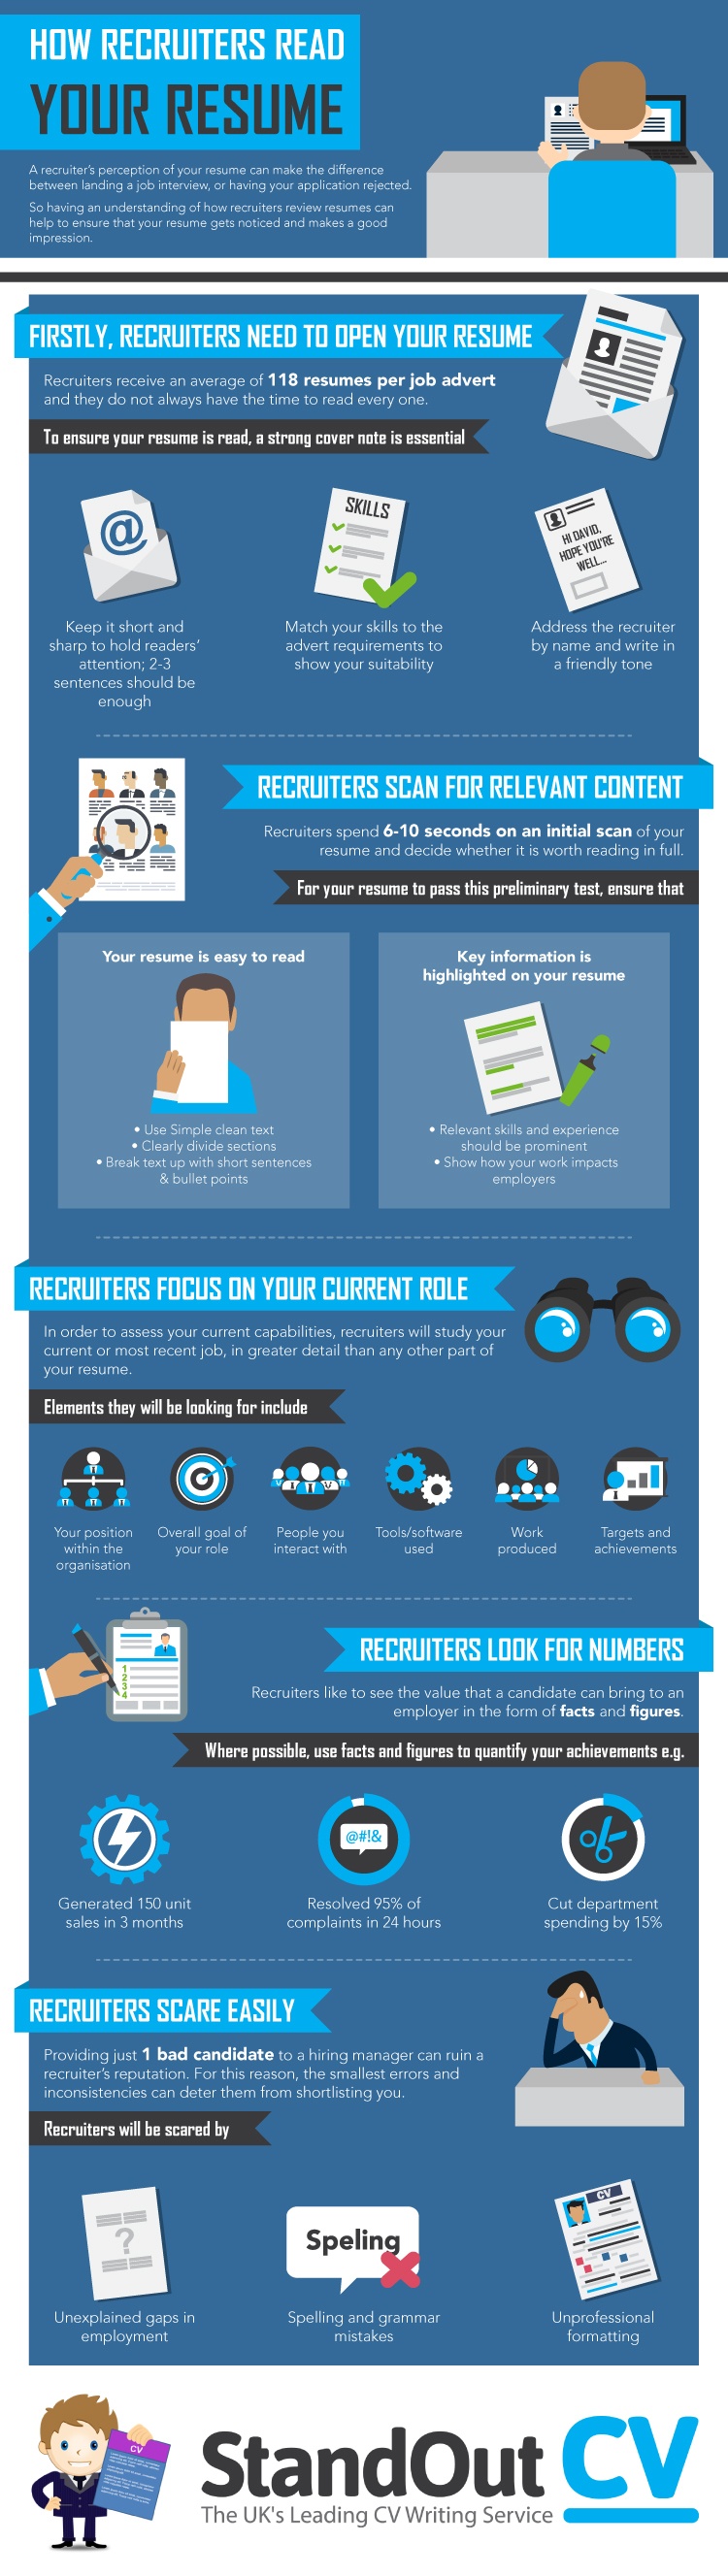 how-recruiters-read-your-resume-infographic.jpg